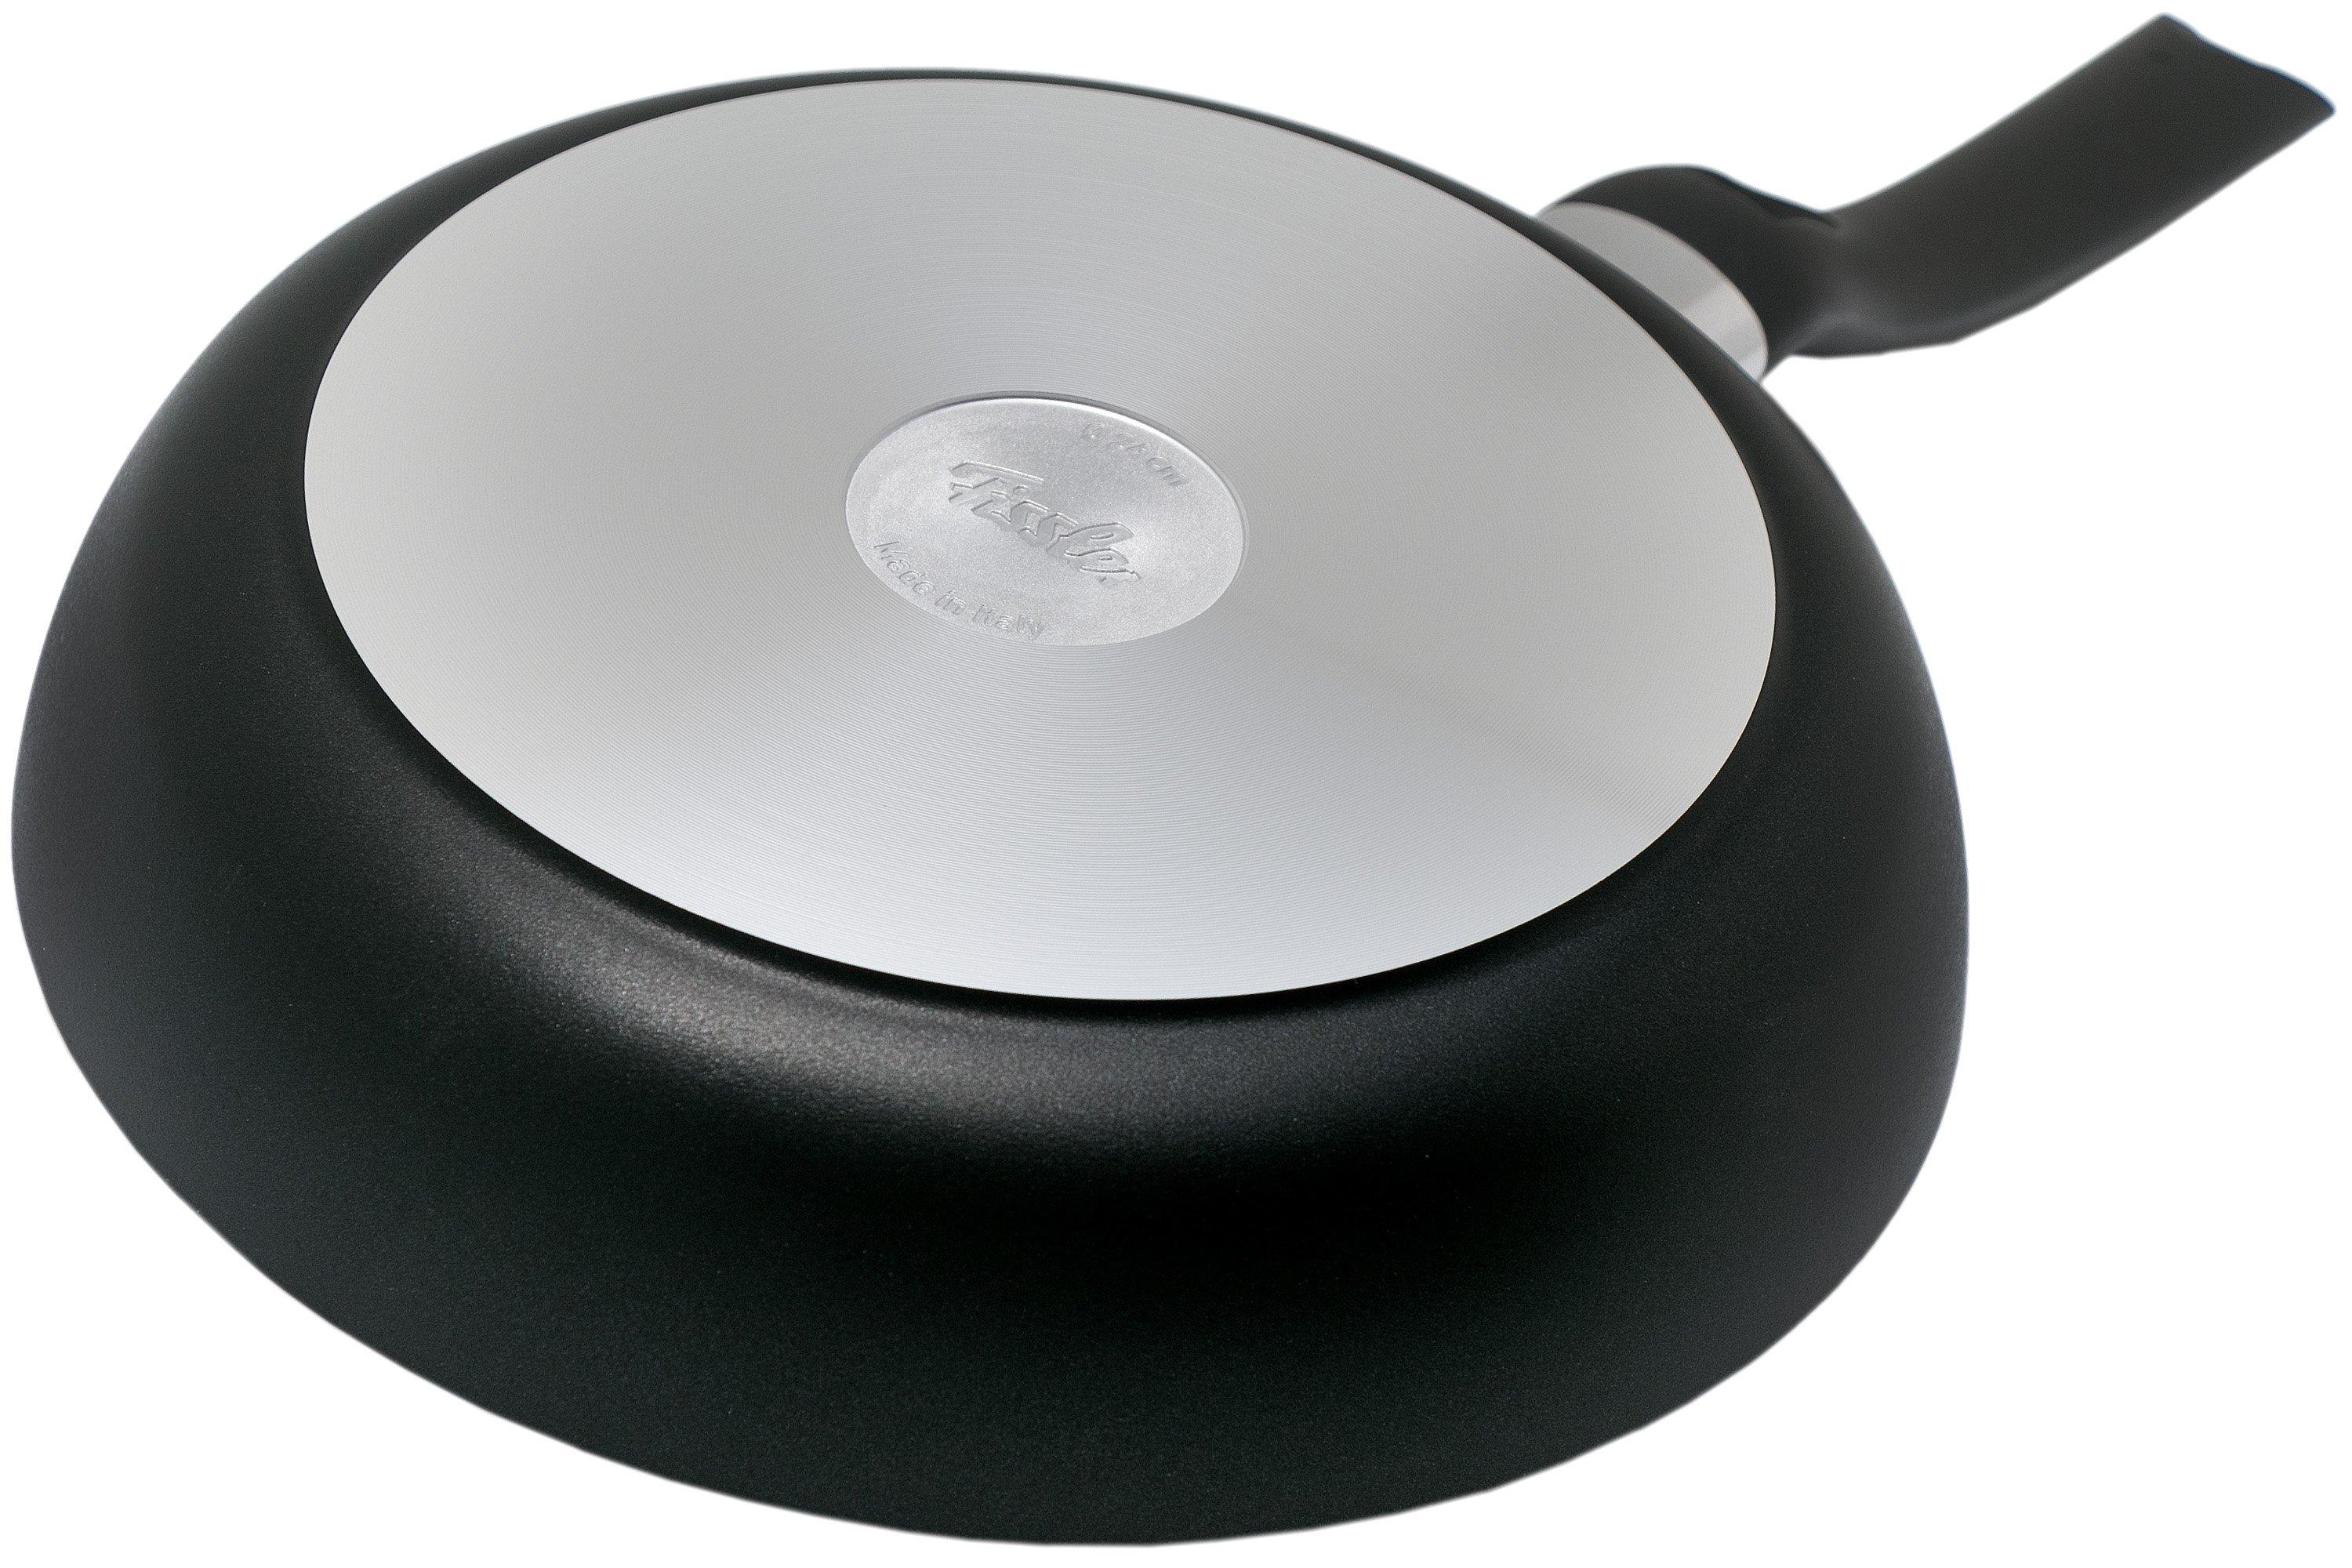 Fissler Cenit 045-300-24-100, shopping cm Advantageously frying at 24 | pan